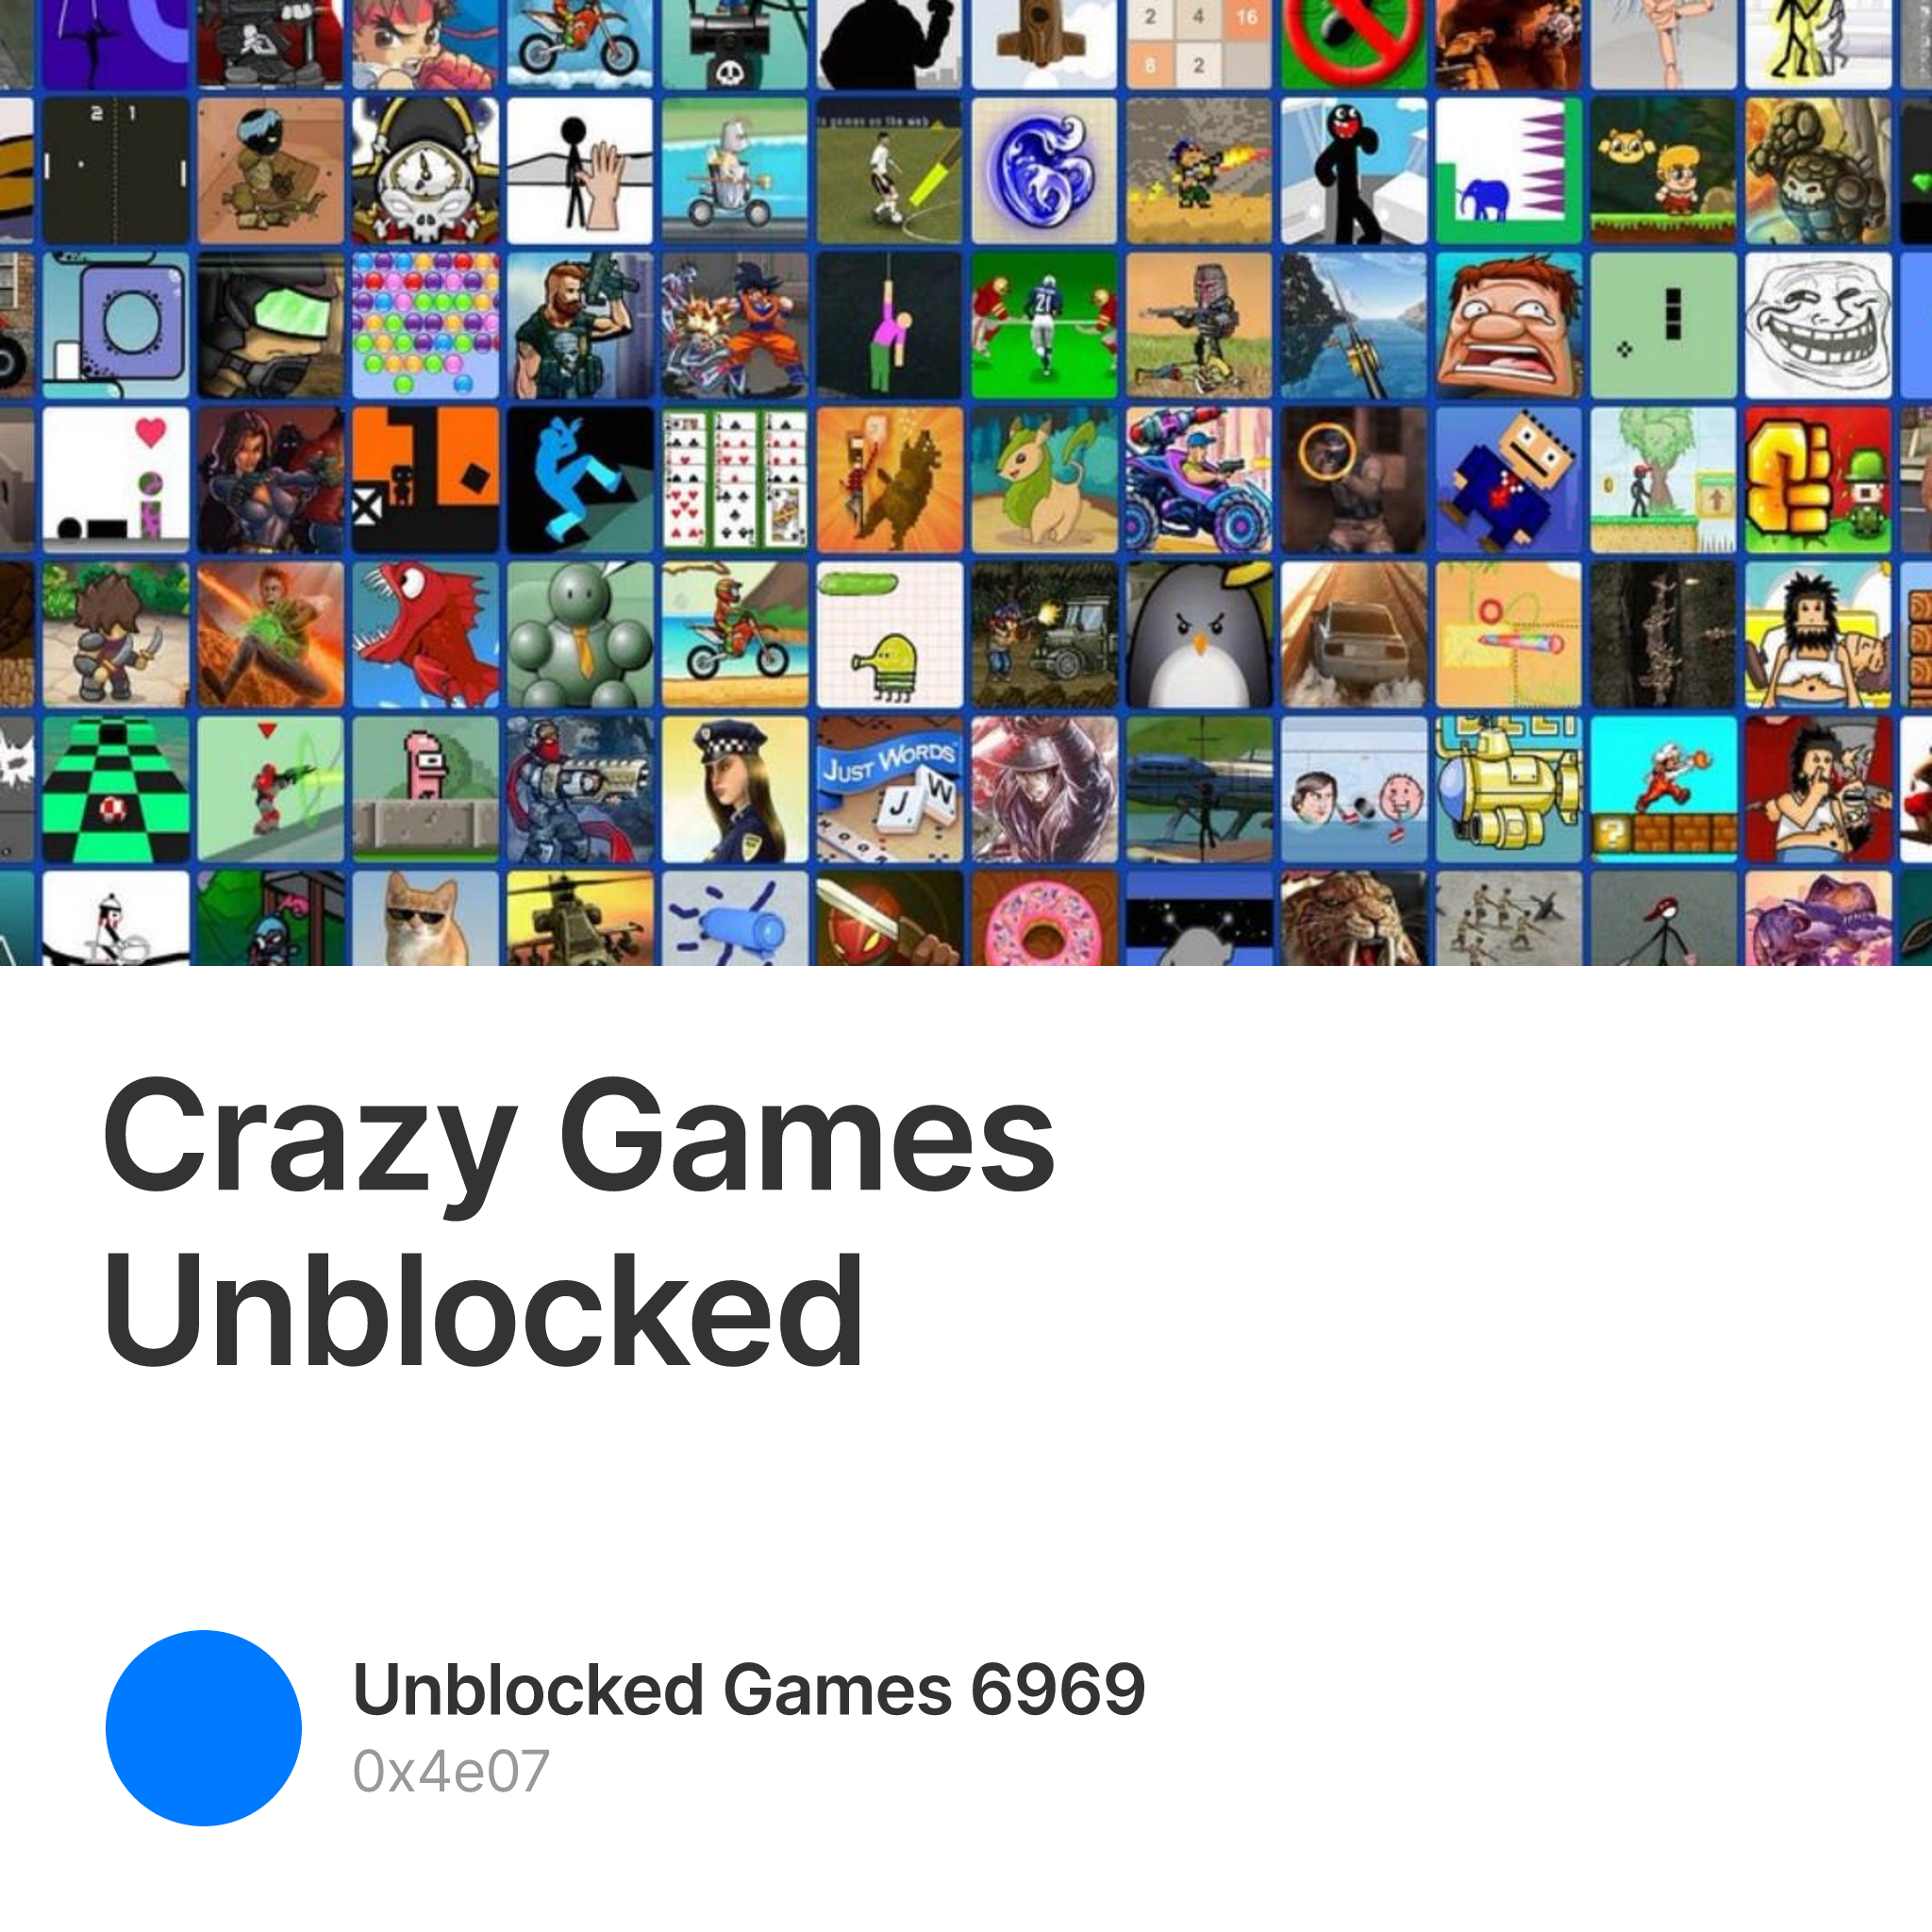 Crazy Games Unblocked  Discover the Top Fun and Exciting Games